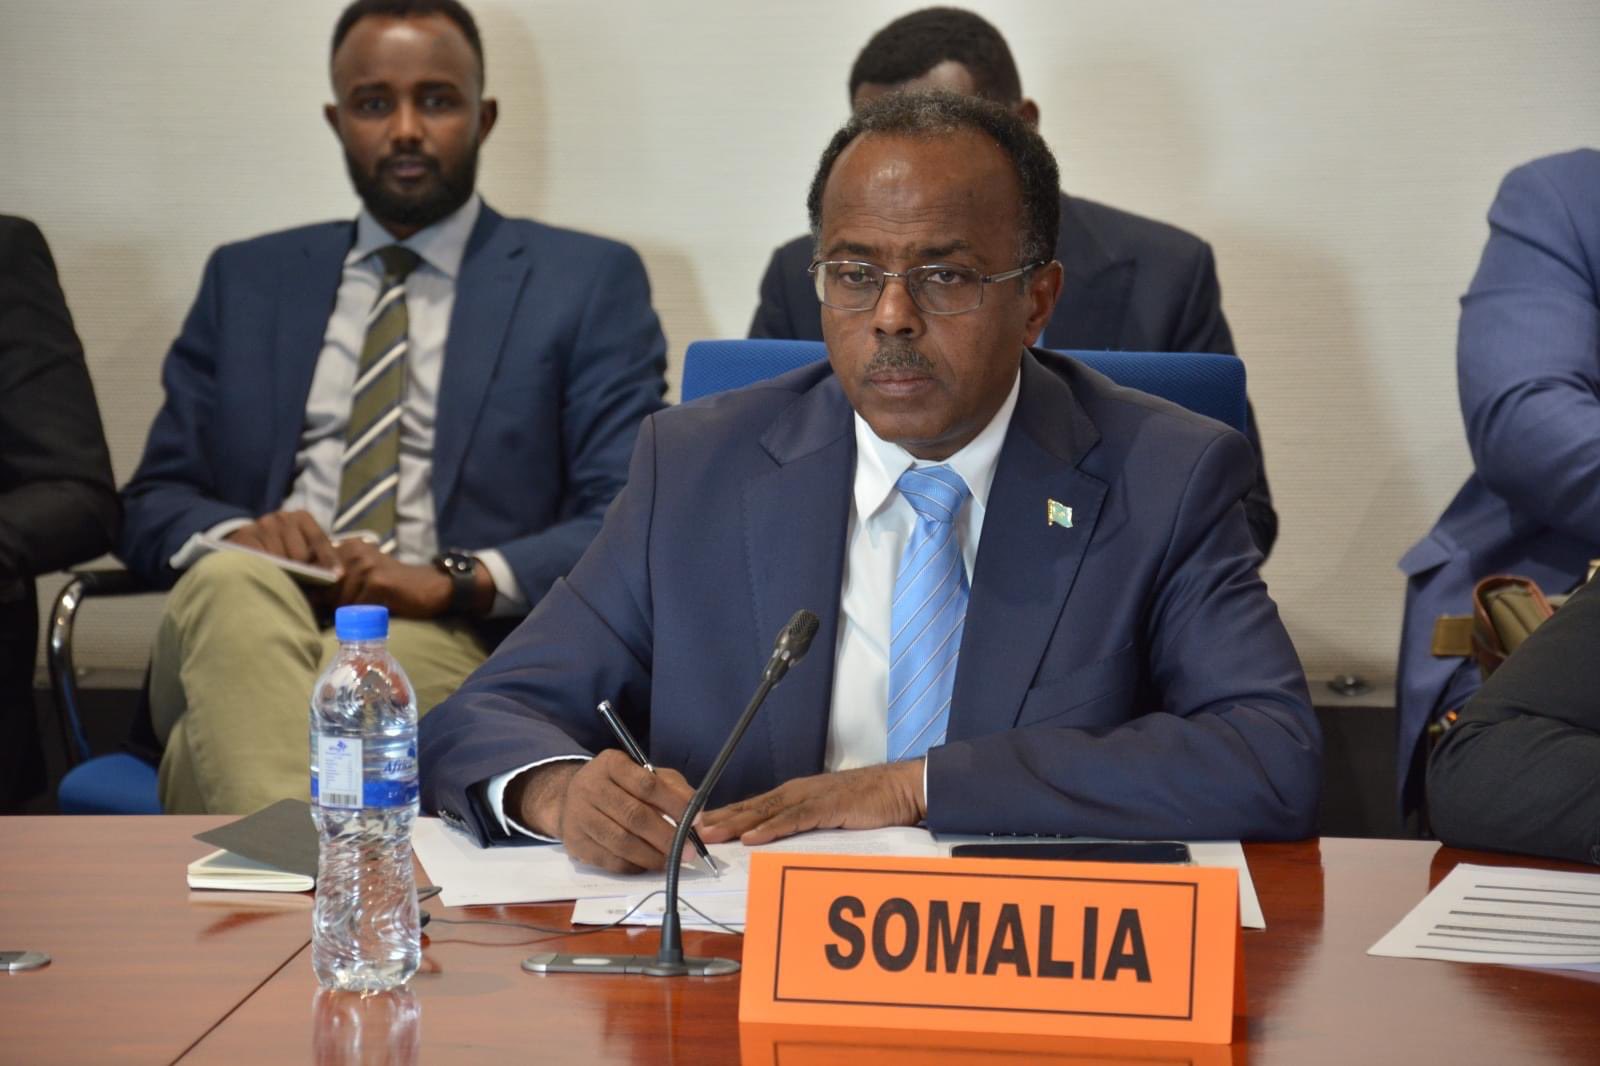 IN THE LATEST VILLA SOMALIA POWER GRAB, FOREIGN MINISTER FIQI SIDELINED AND STATE MINISTER ALI BALCAD EMPOWERED